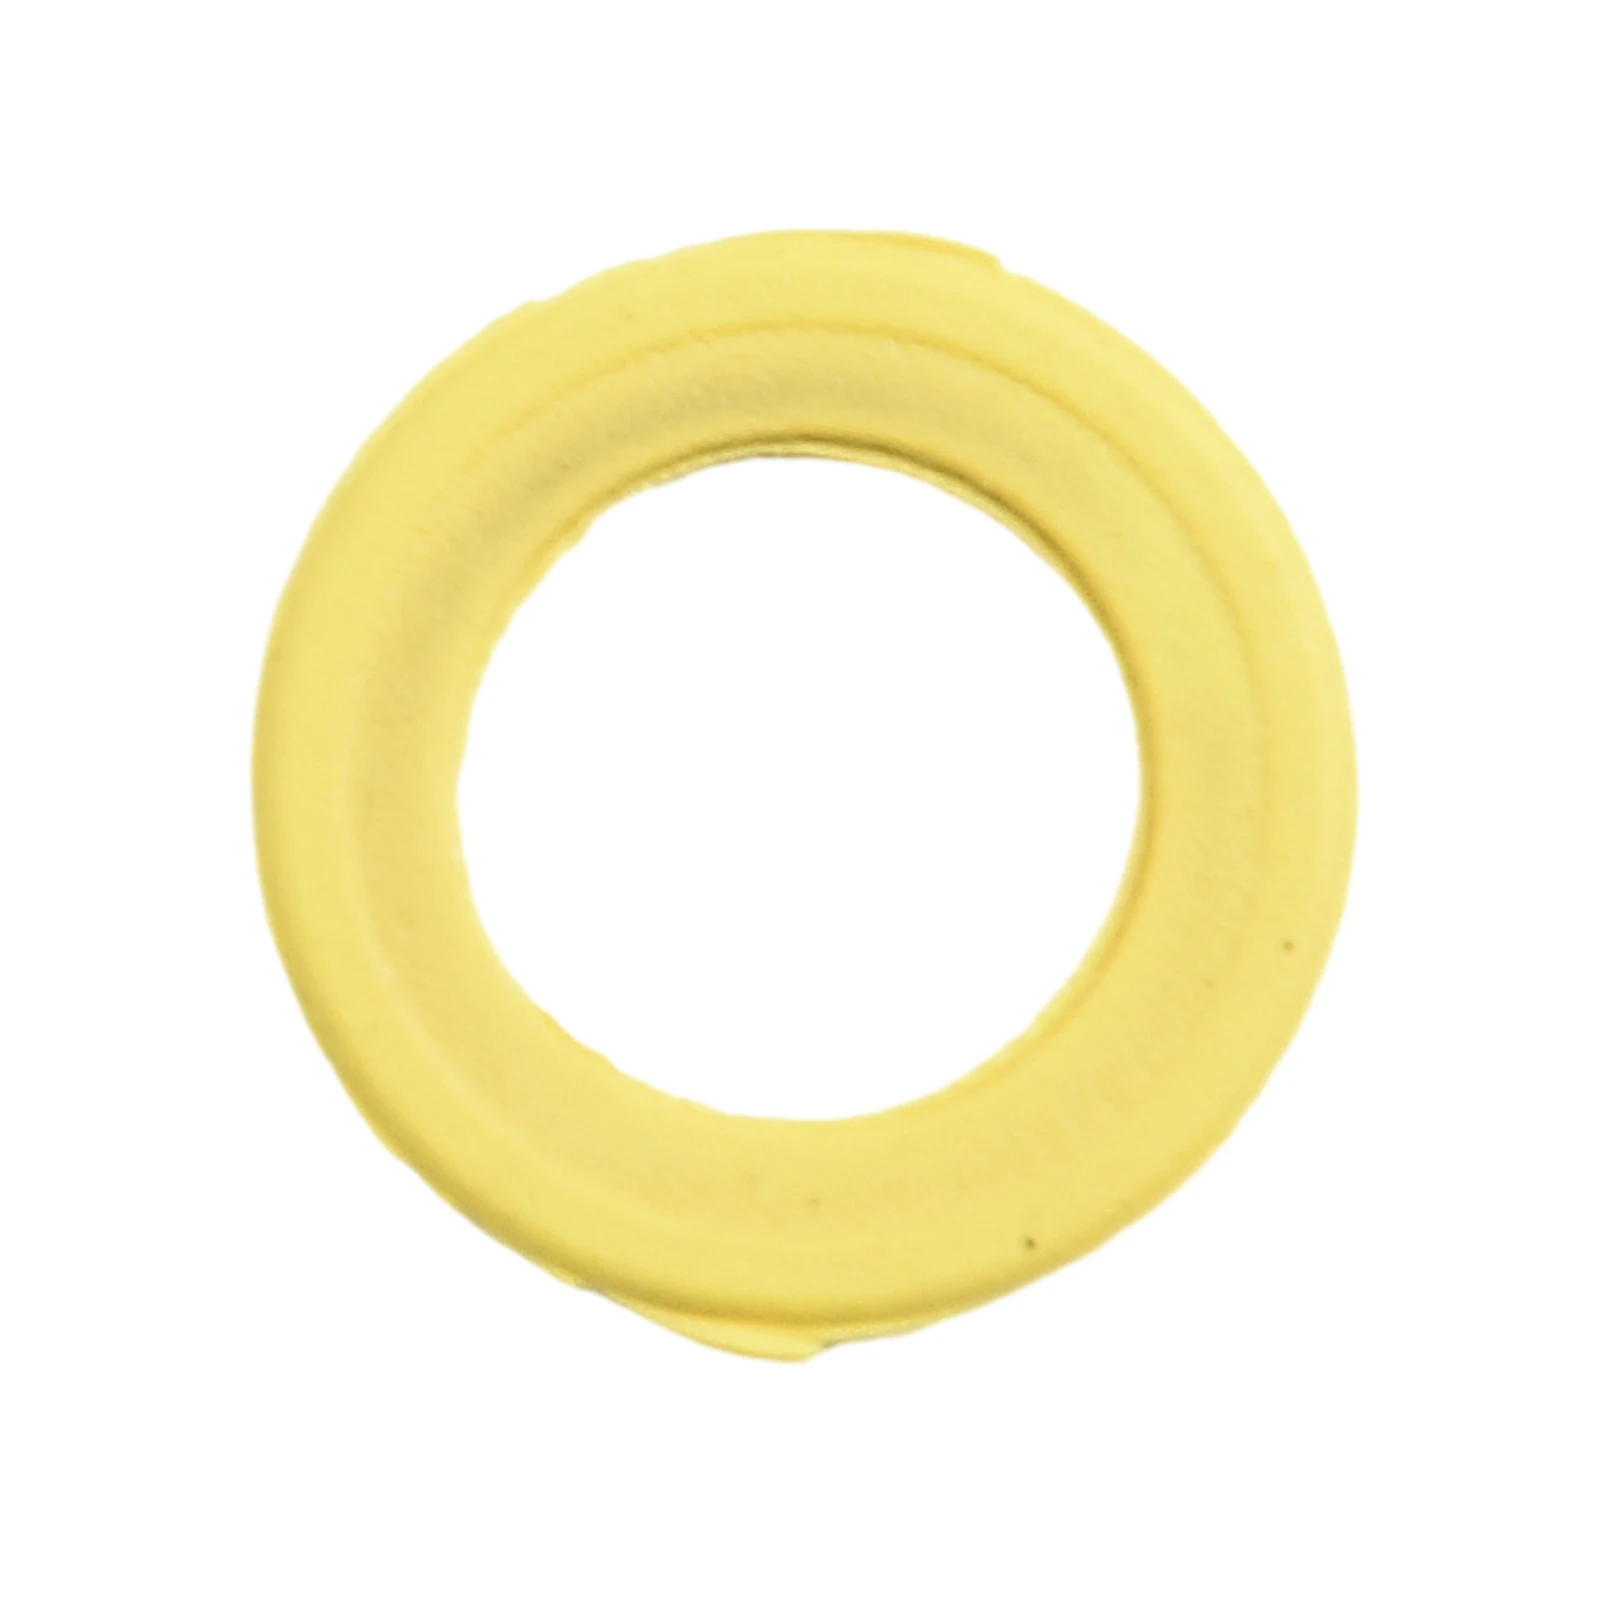 1pc Bumper Door Rubber Stopper For Infiniti Q45 Q50 Q60 QX56 QX80 Car Door Dampers Rubber Pier Machine Cover Car Accessories kitchen sewer floor drain sealing ring washing machine tube connector anti odor telescopic sealing stopper